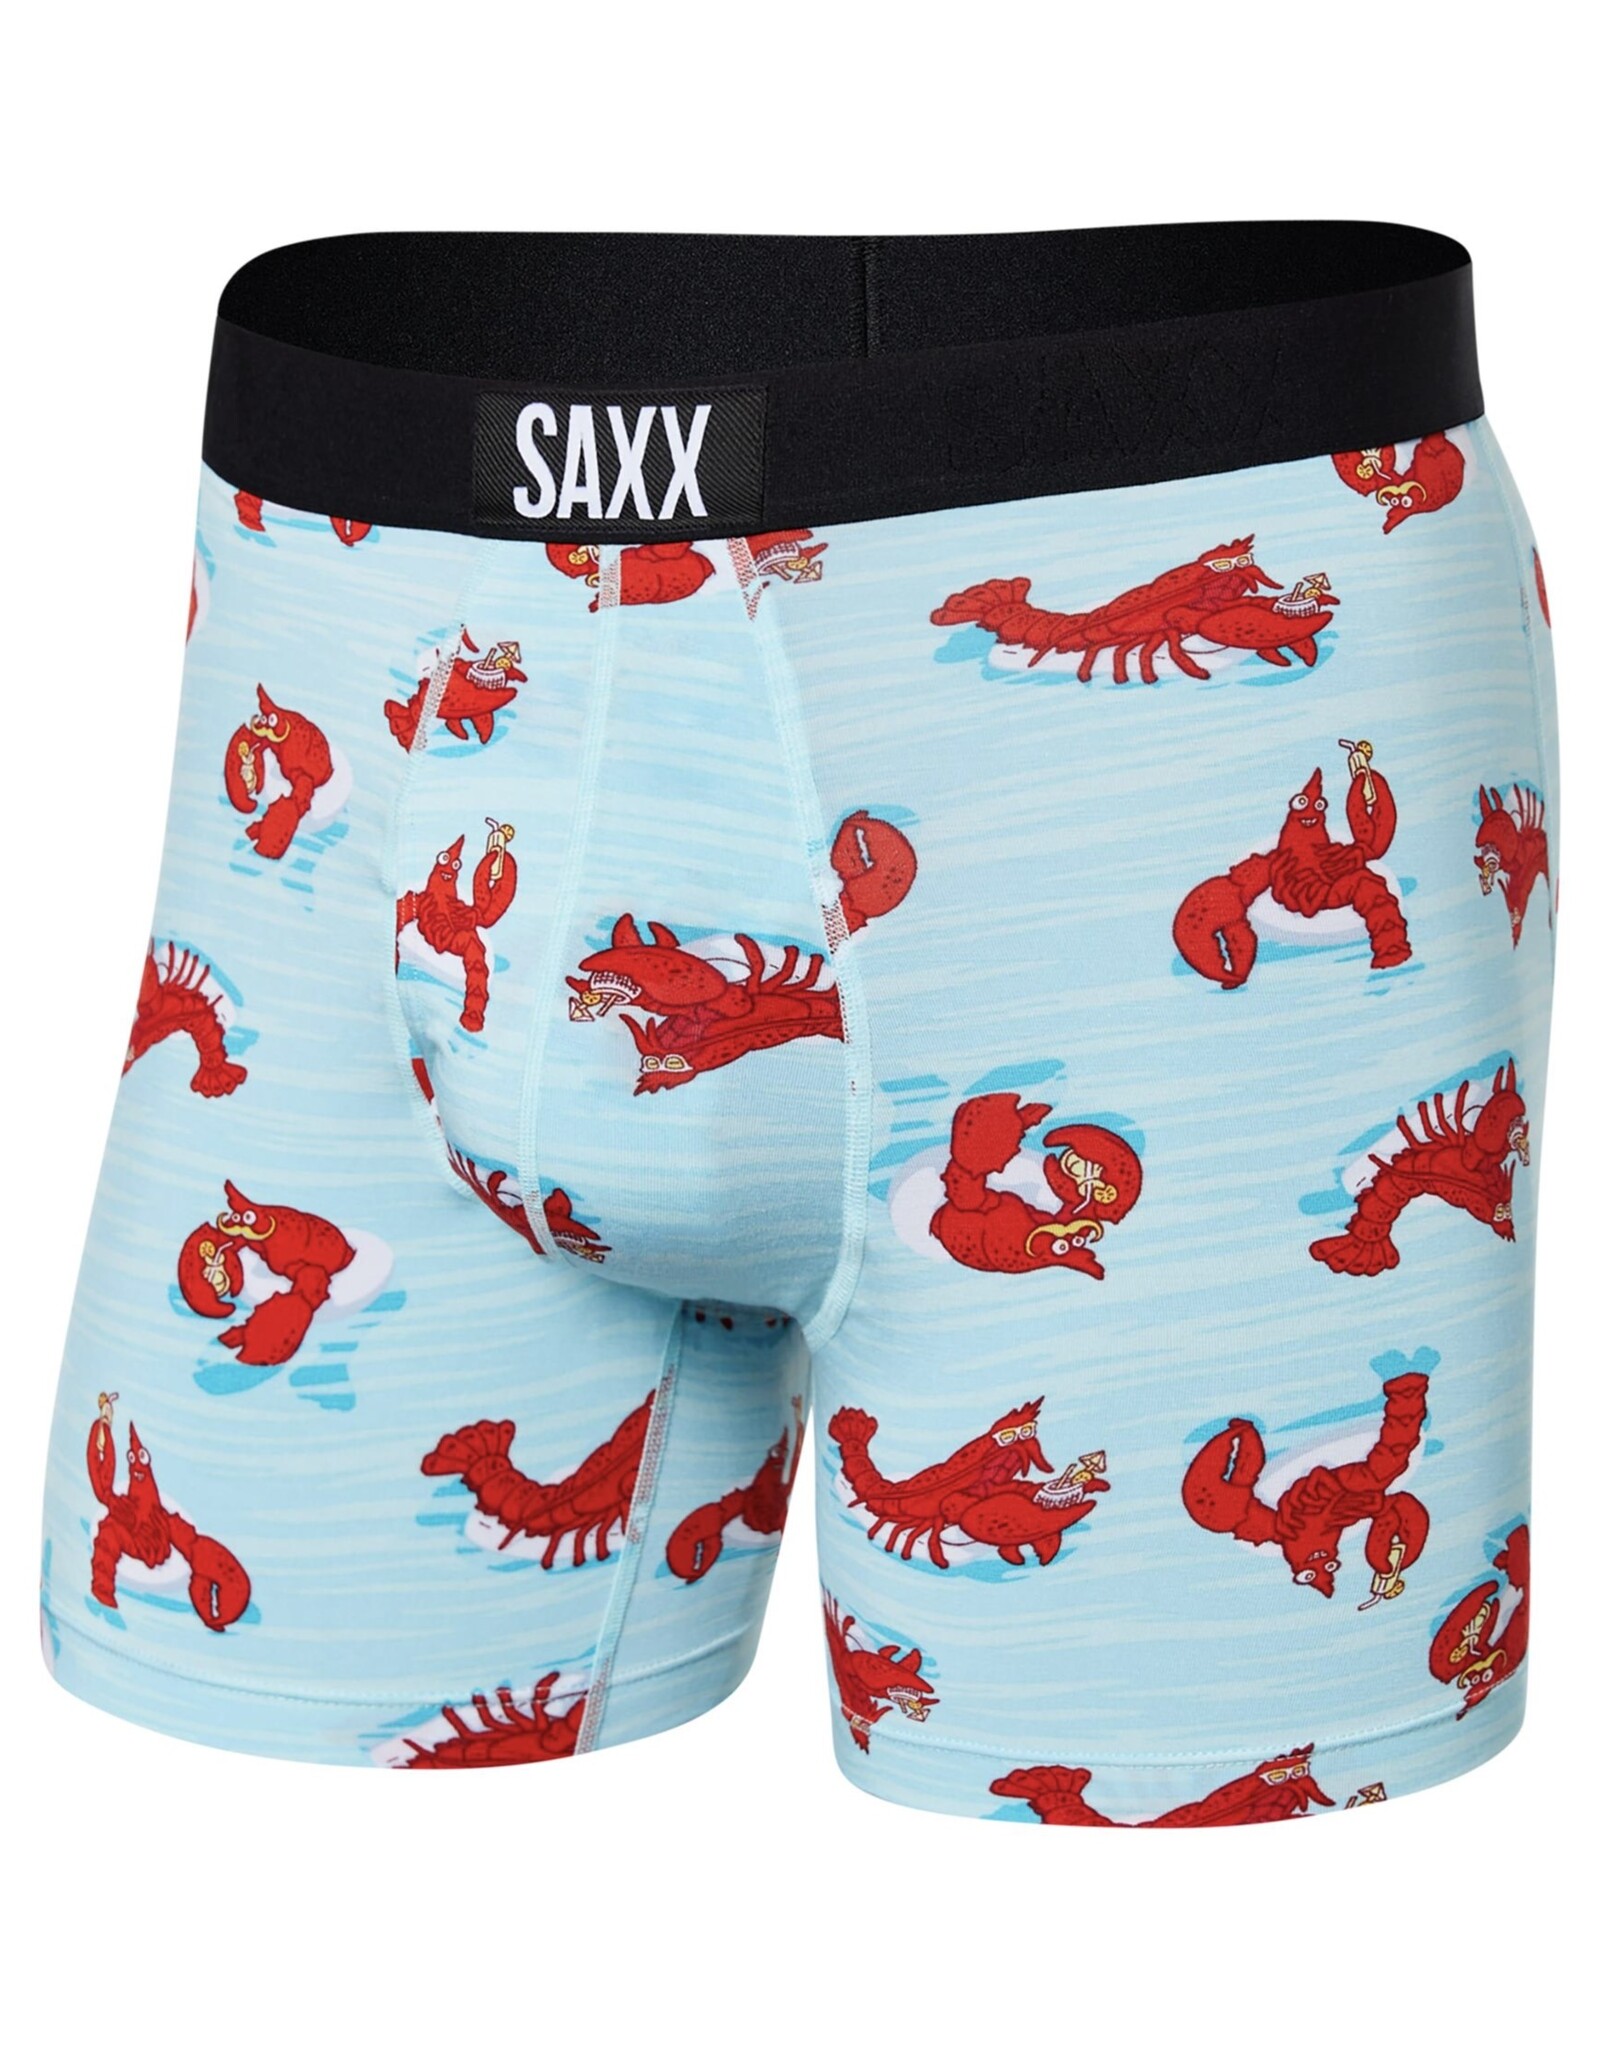 Saxx Ultra Boxer Brief w/ Fly, Go With The Floe Navy, SXBB30F-FLO, Mens  Boxer Briefs